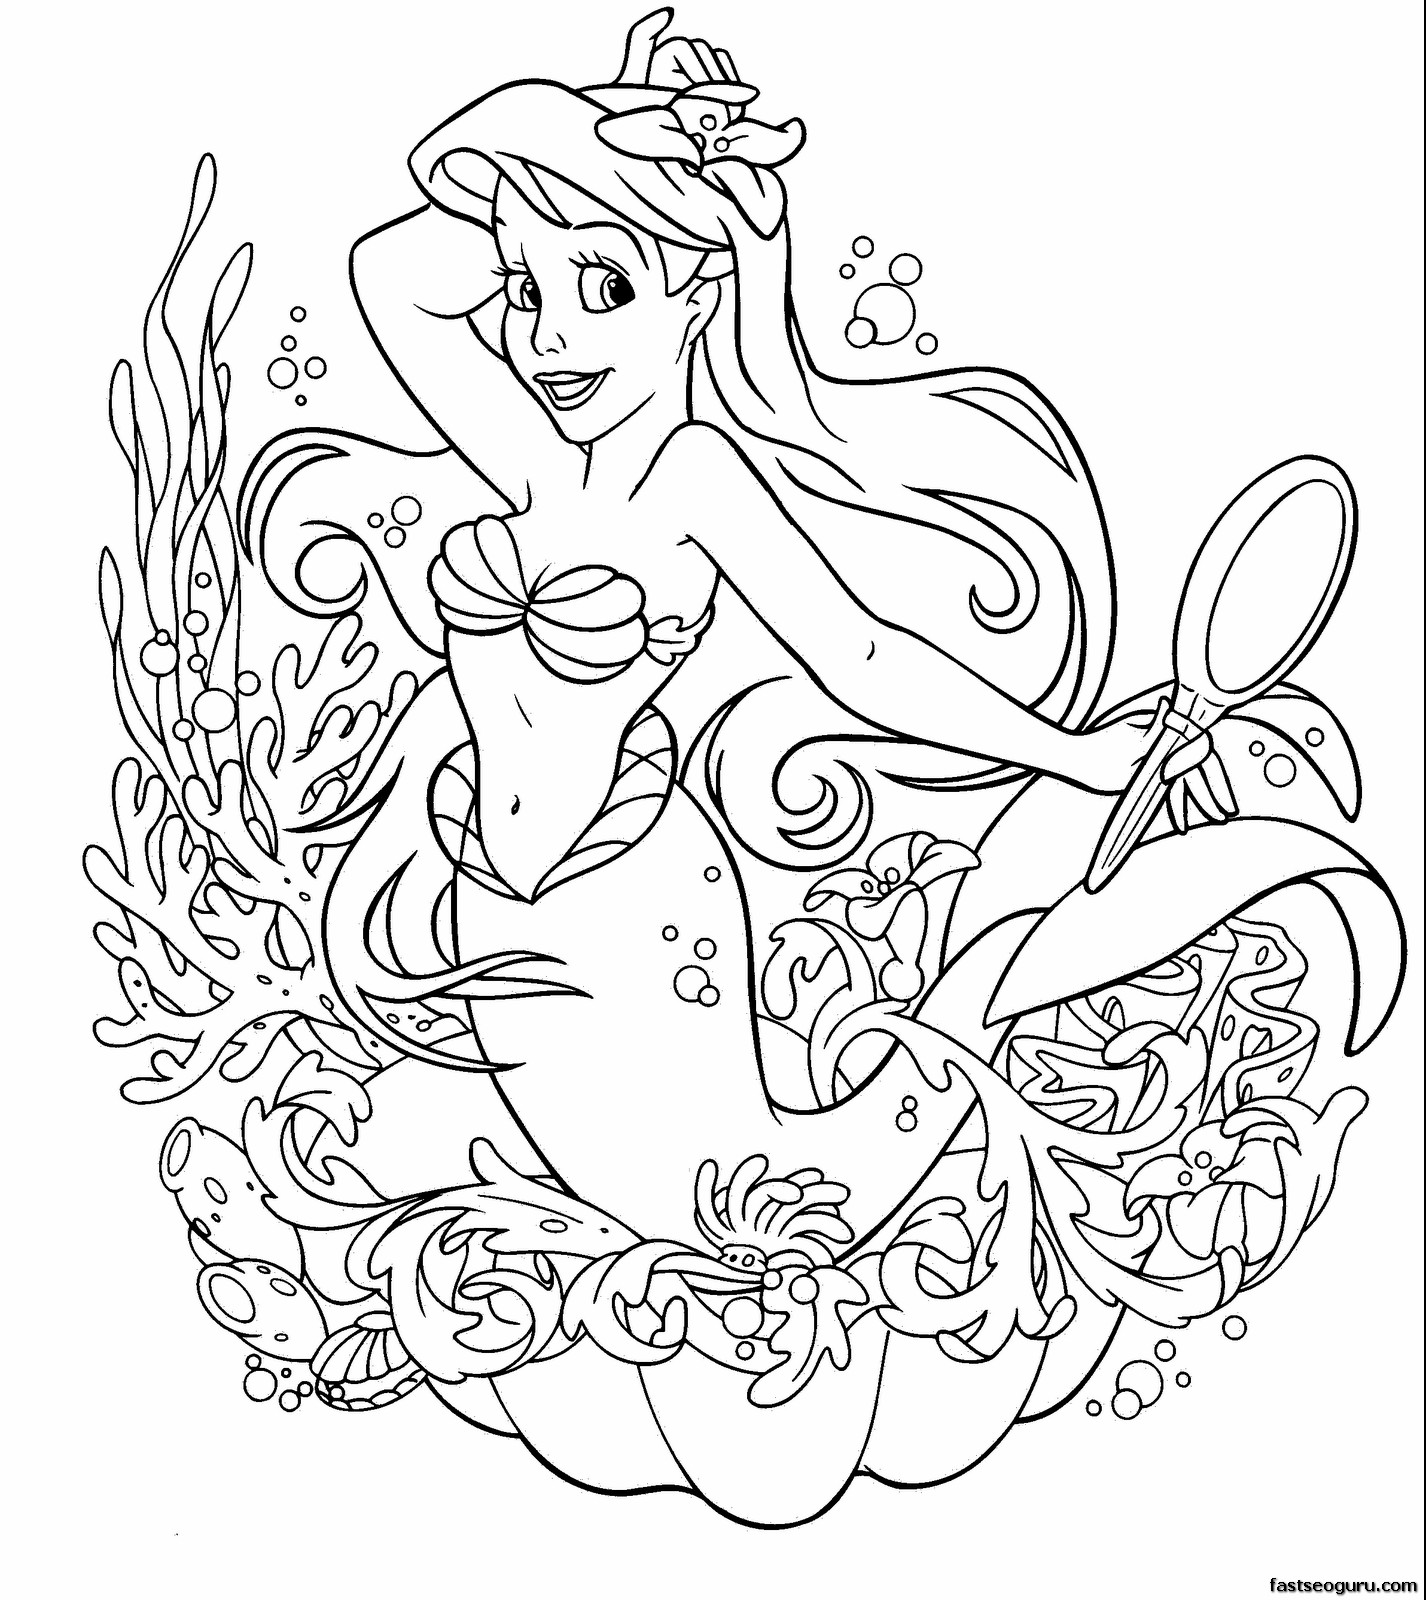 Disney Coloring Pages For Girls
 Printable disney ariel little mermaid coloring page